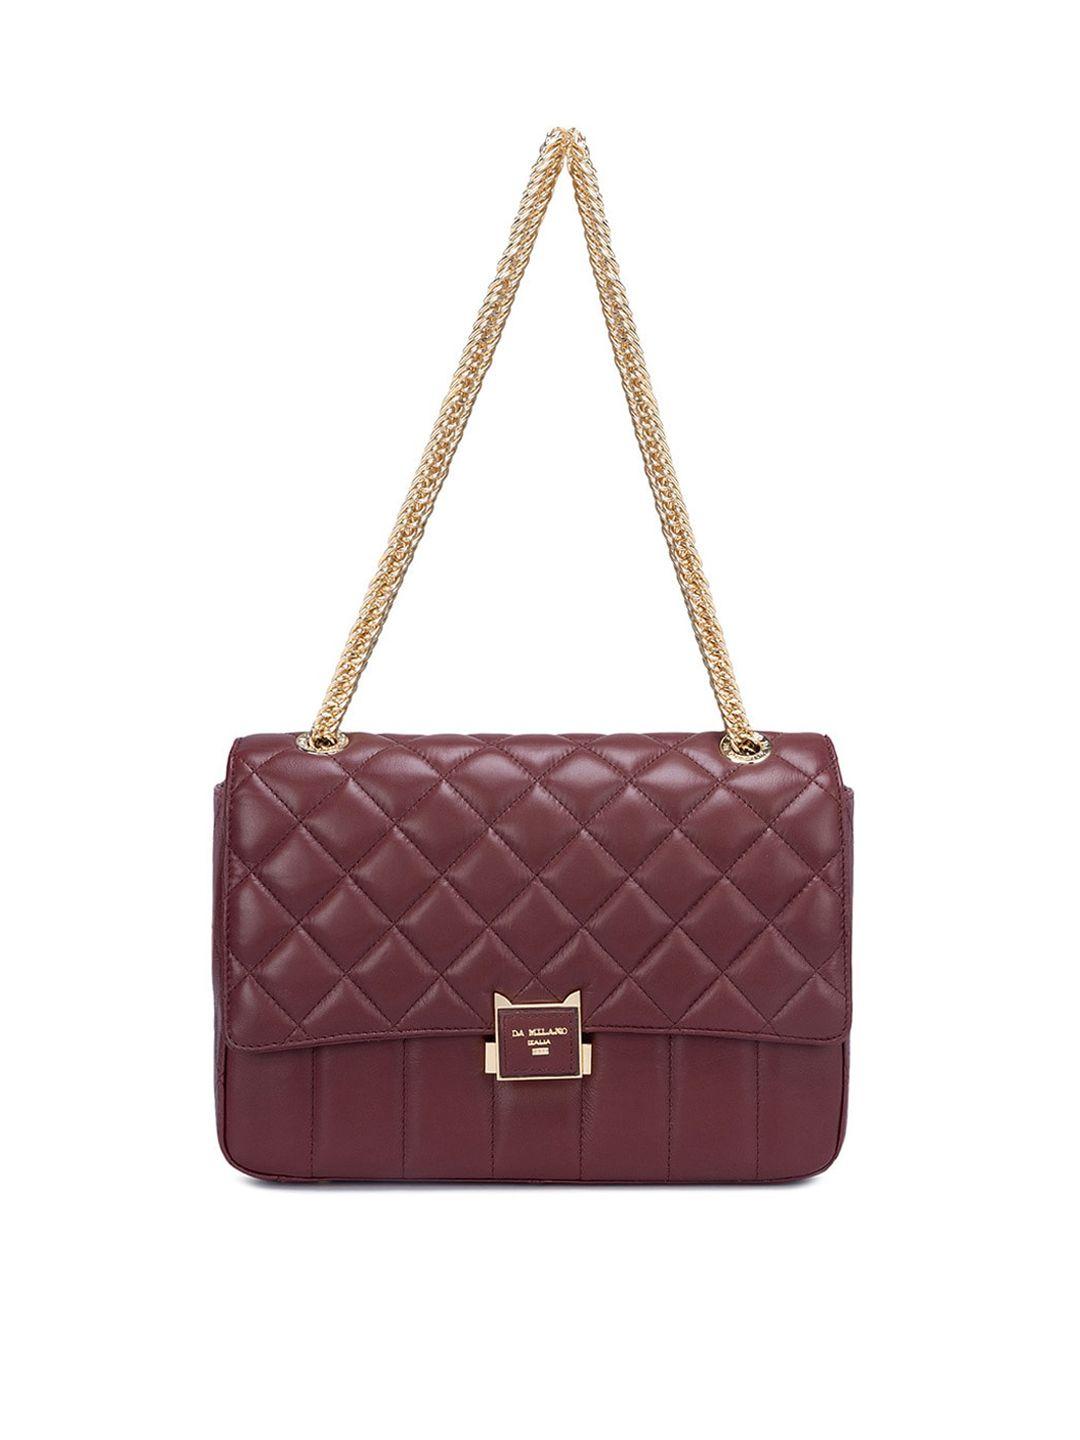 da milano textured leather structured shoulder bag with quilted